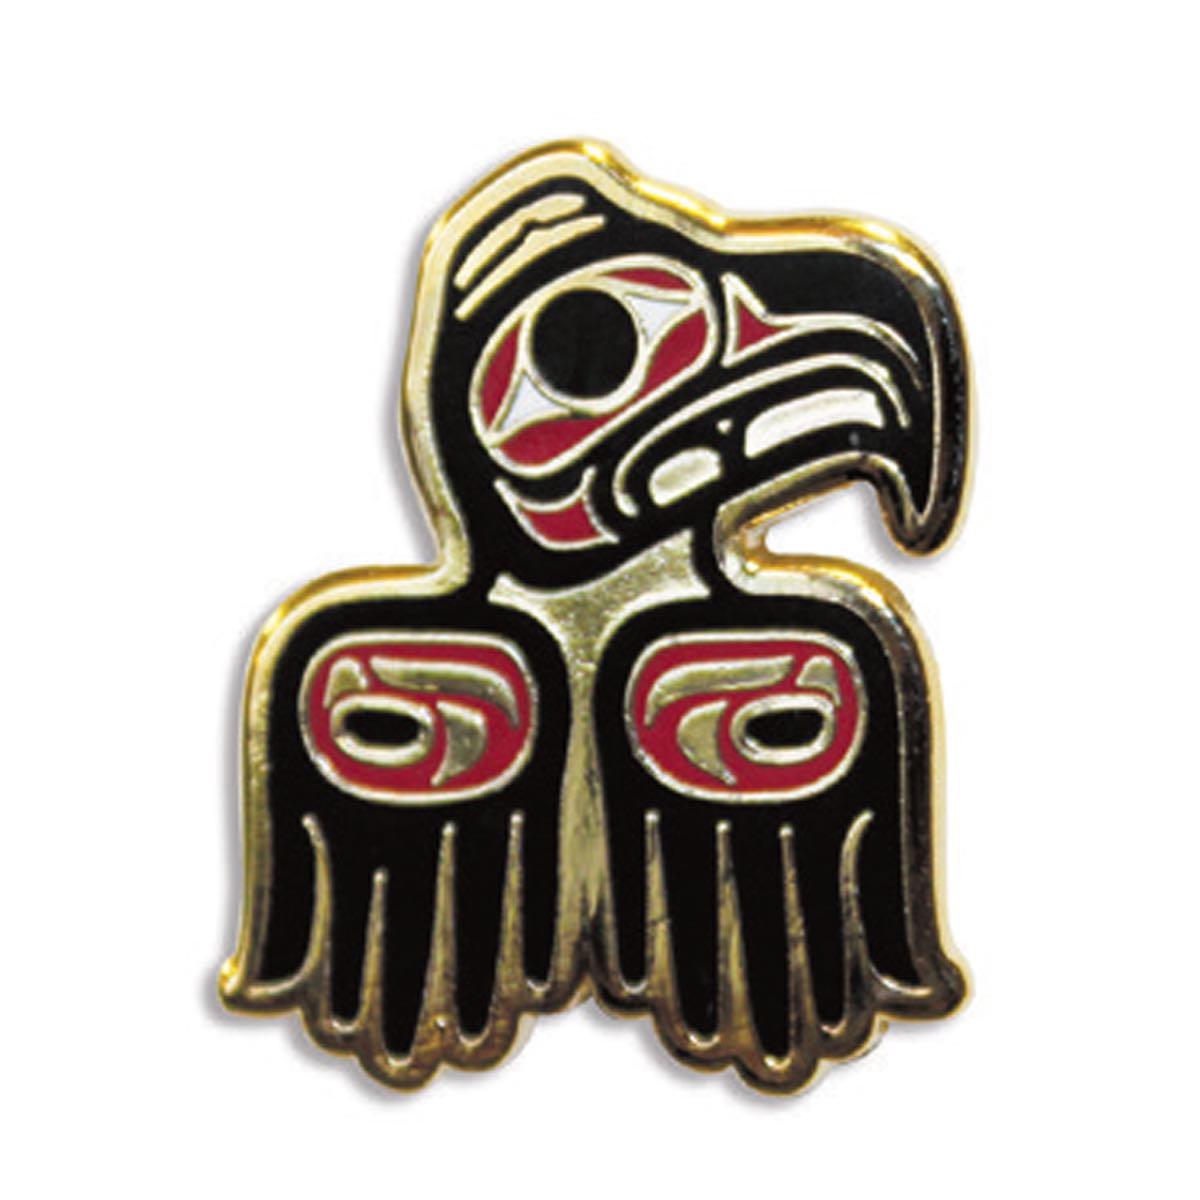 Enamel Pin Donnie Edenshaw Eagle Tradition - Enamel Pin Donnie Edenshaw Eagle Tradition -  - House of Himwitsa Native Art Gallery and Gifts